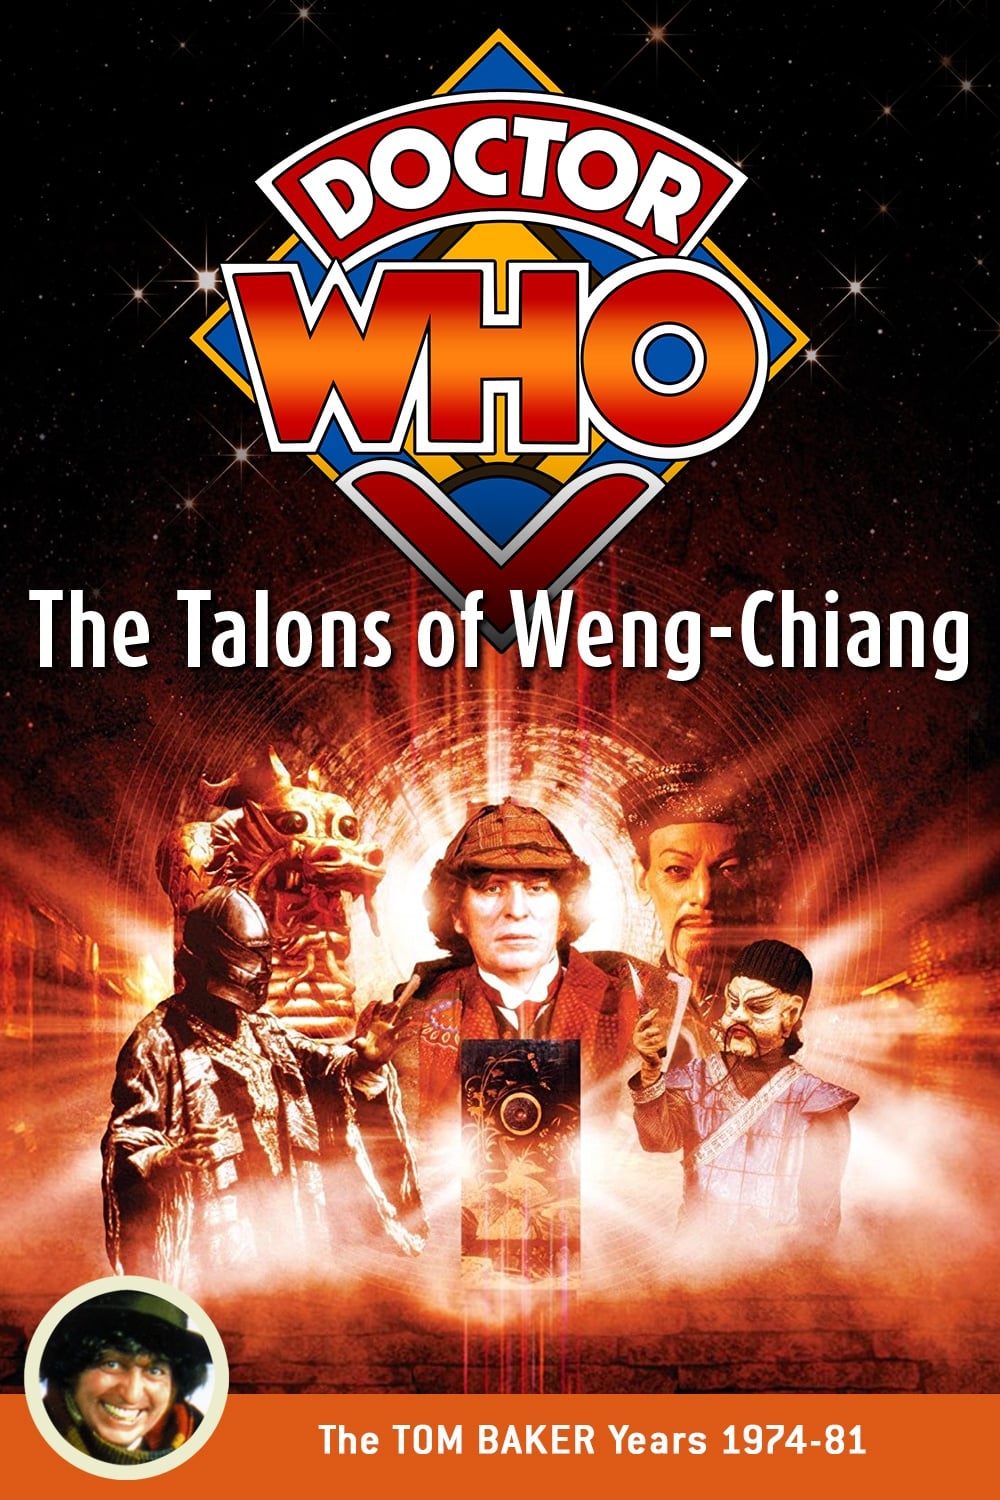 Doctor Who: The Talons of Weng-Chiang film